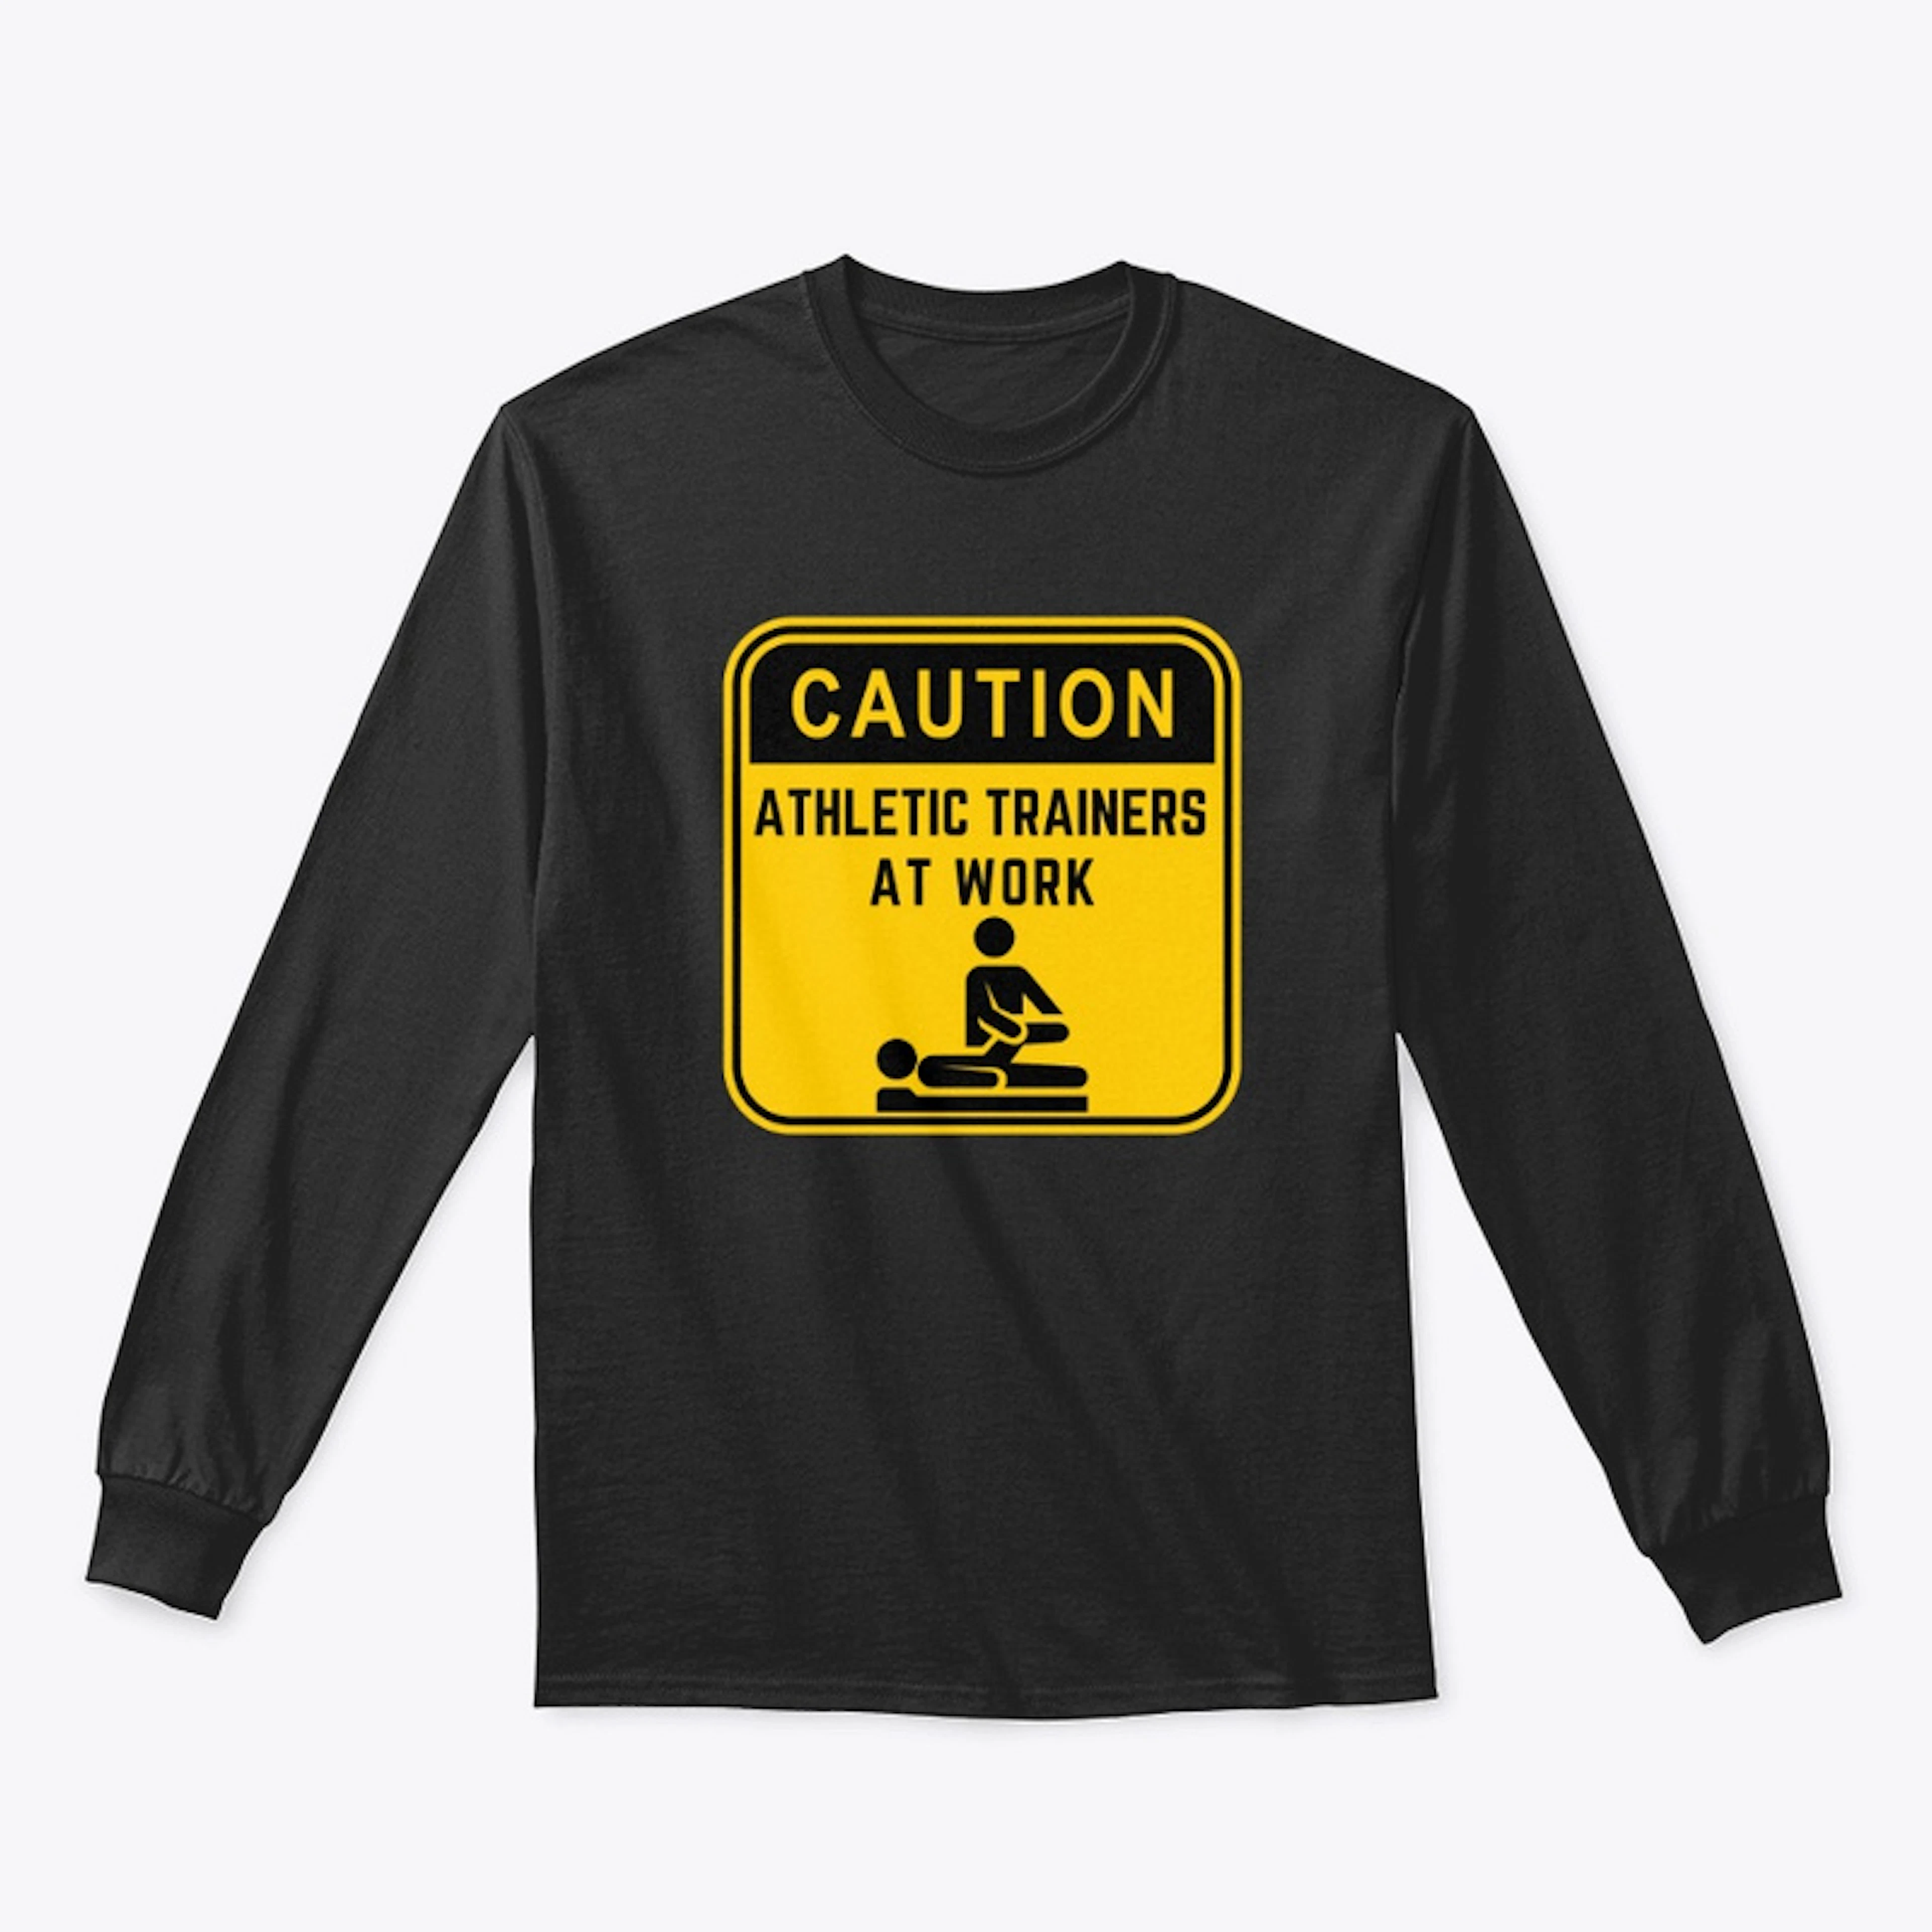 Athletic Trainers at Work LS Tee